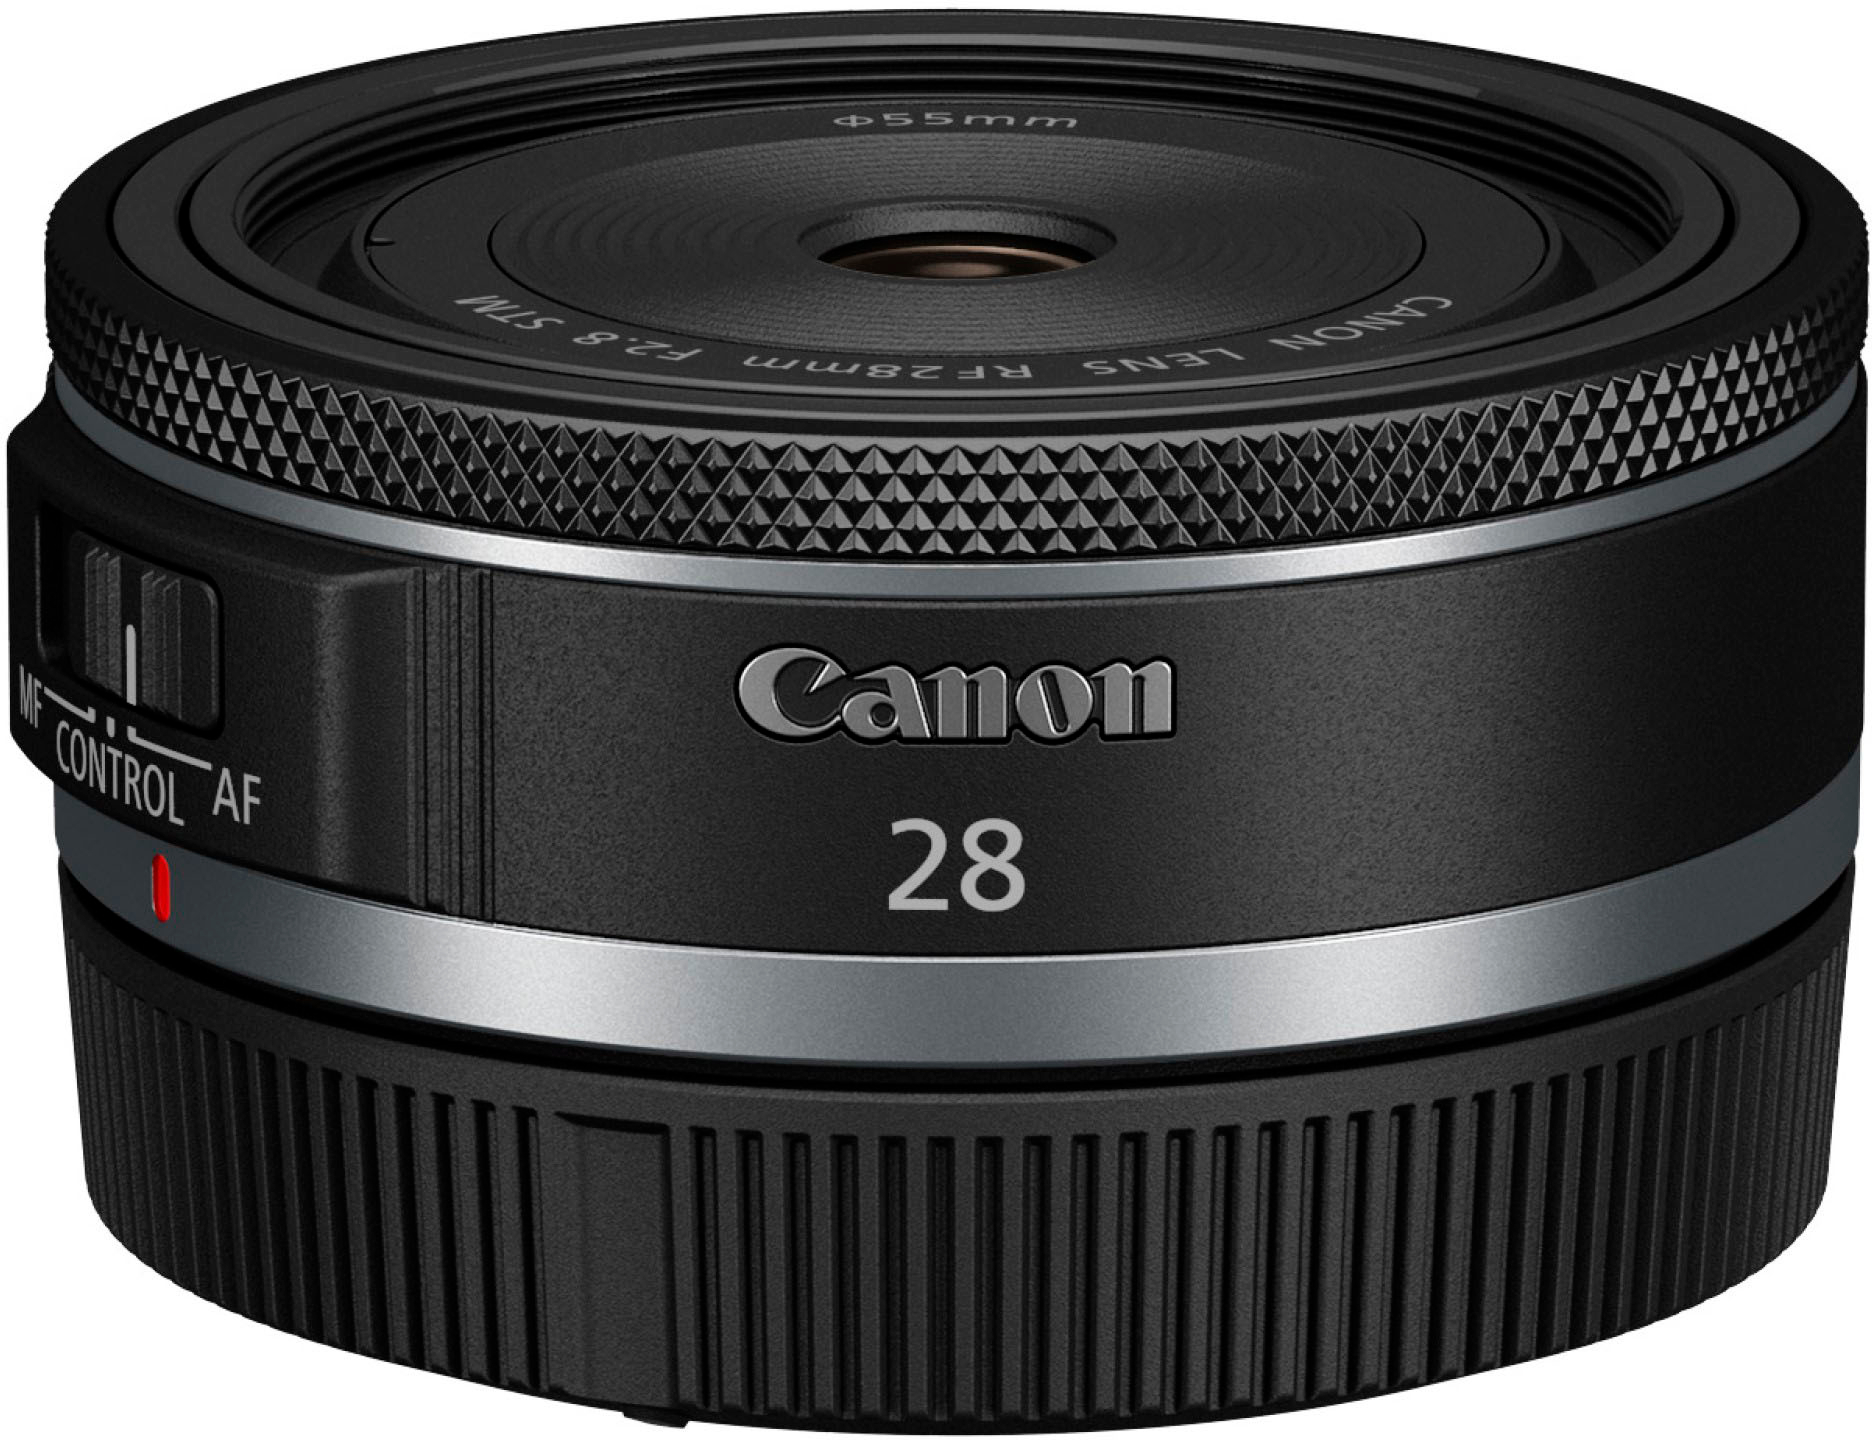 Canon RF28mm F2.8 STM Wide-Angle Prime Lens for EOS R-Series Cameras Black  6128C002 - Best Buy